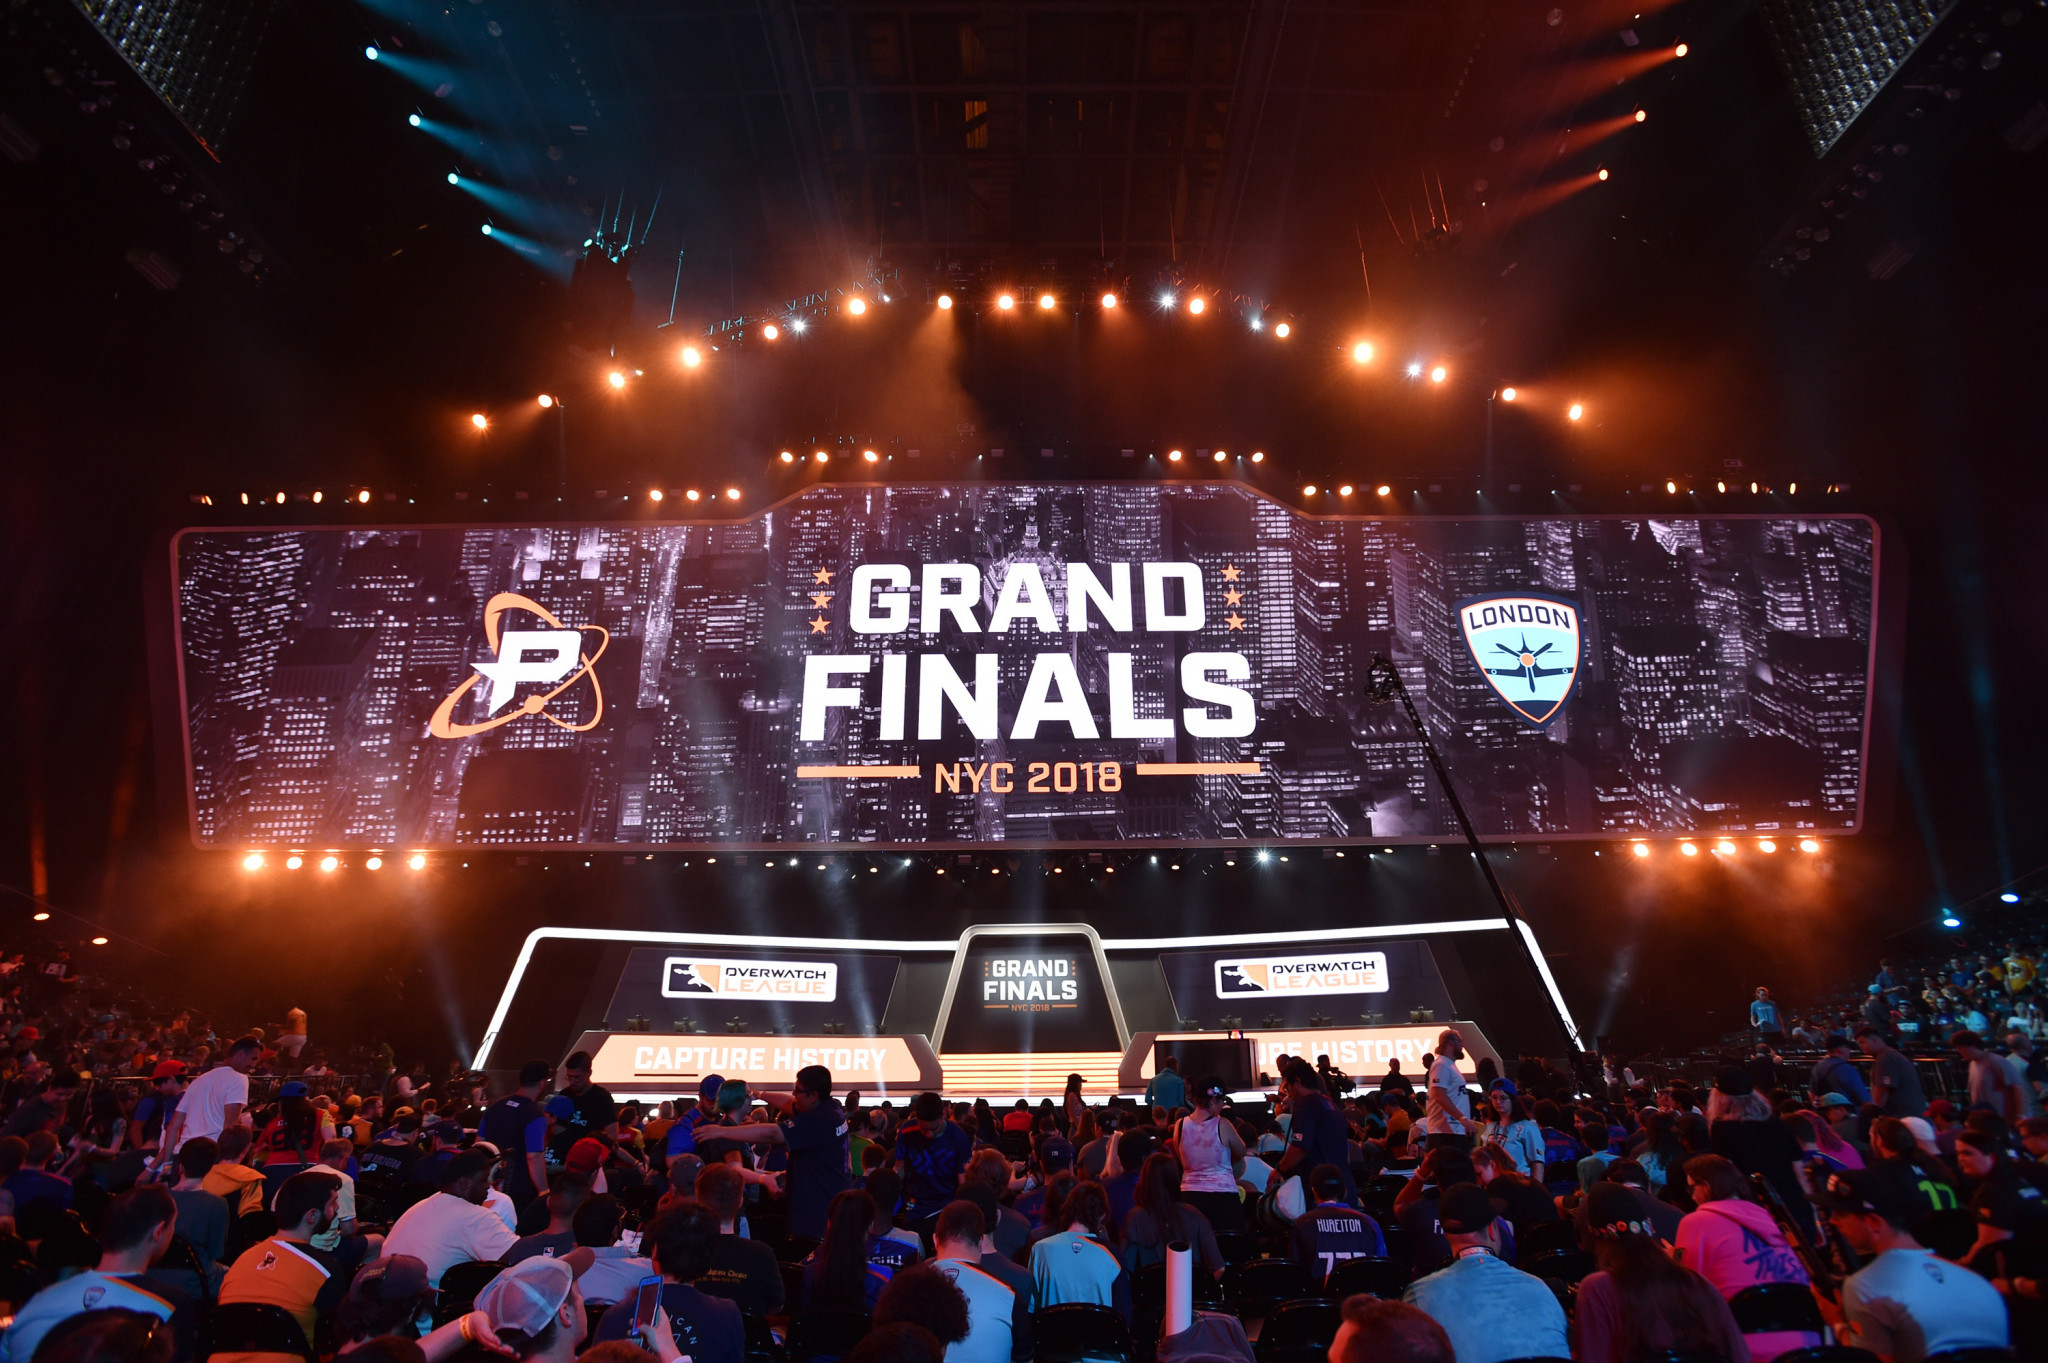 Today's Overwatch League is already popular enough to fill vast arenas ©Getty Images